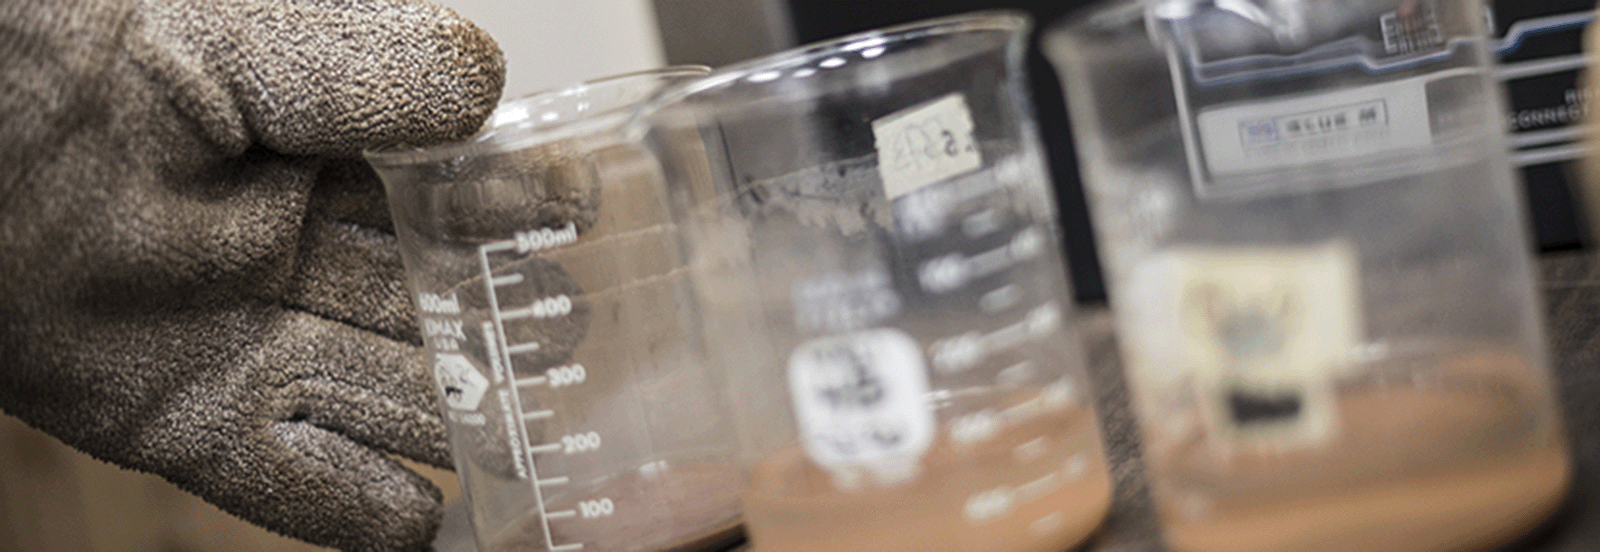 Soil analysis – student taking beakers out of oven during soil analysis